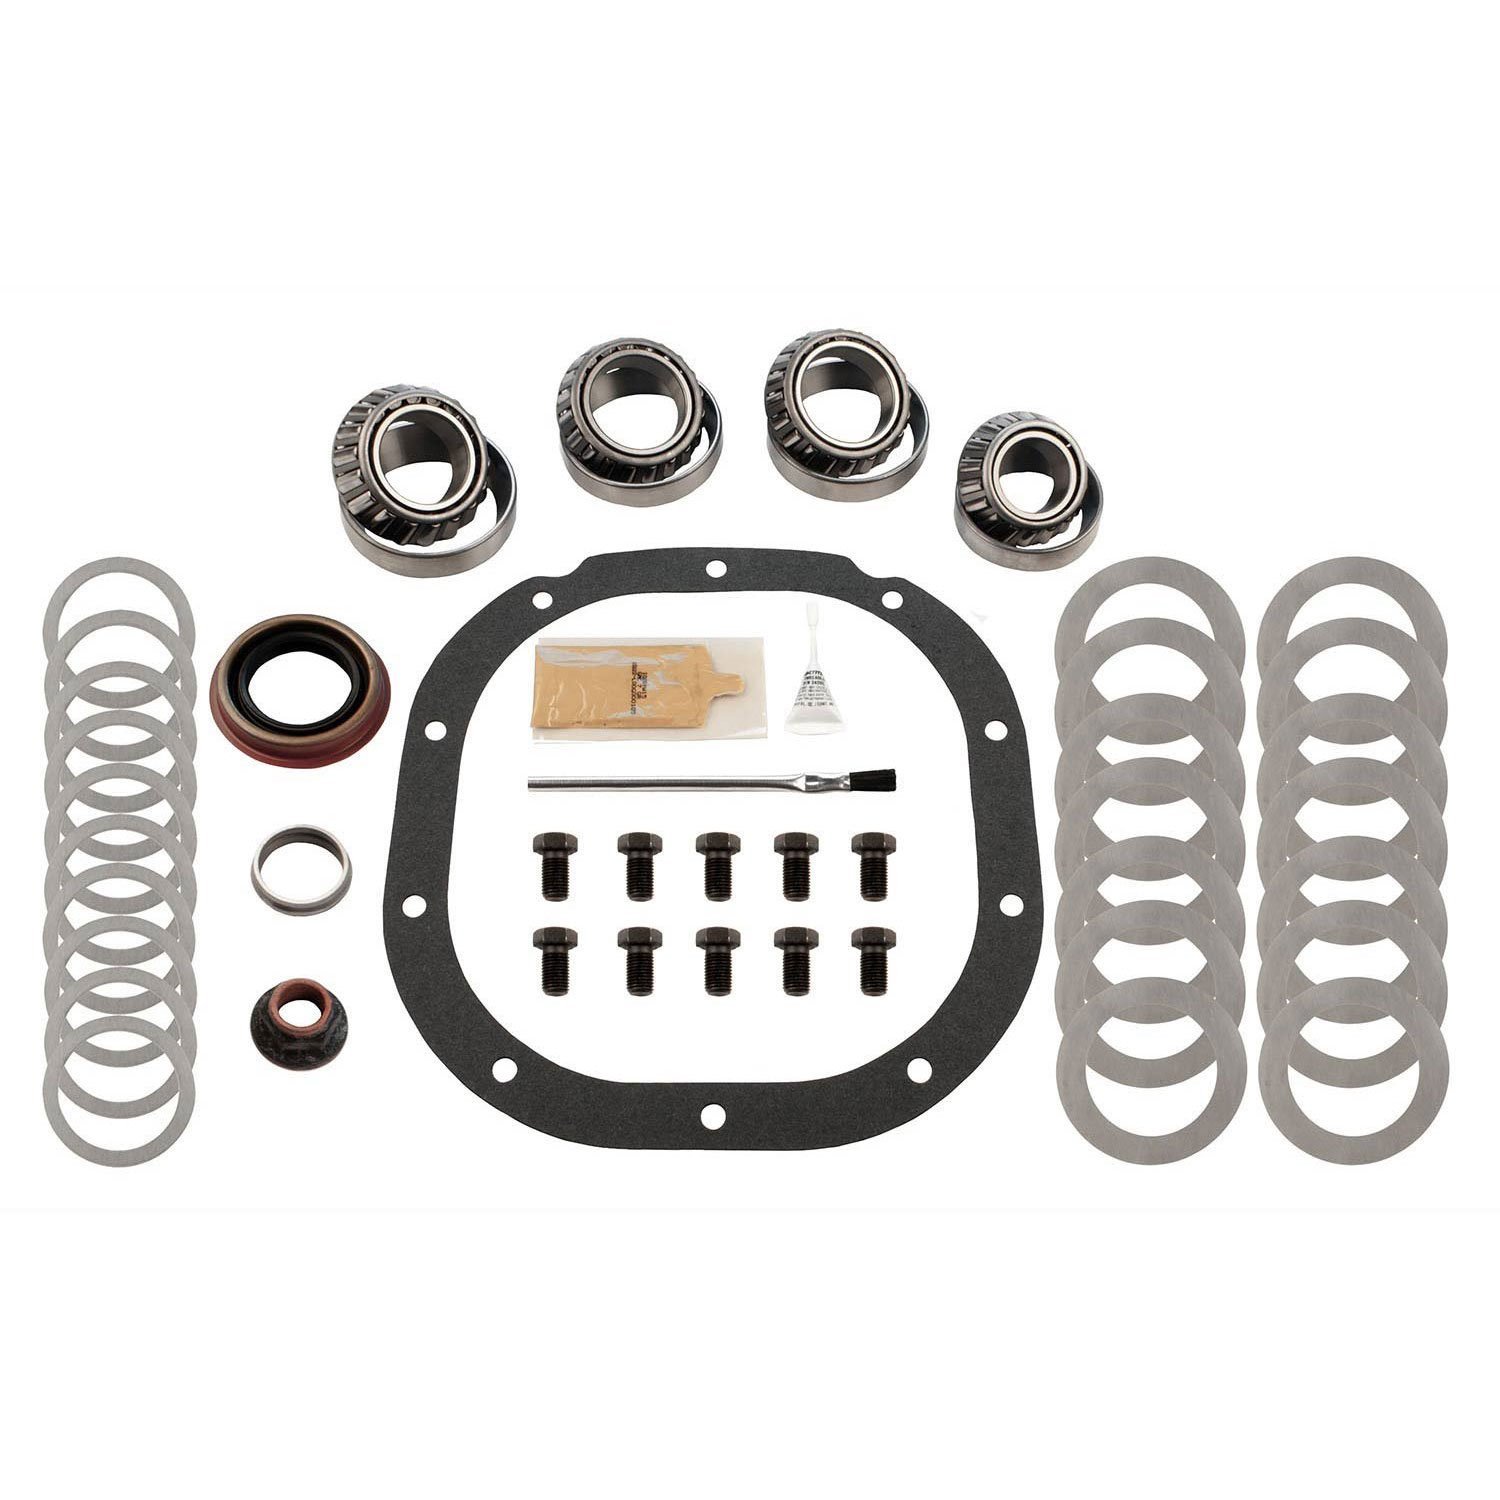 Differential Complete Kit Ford 8.8"